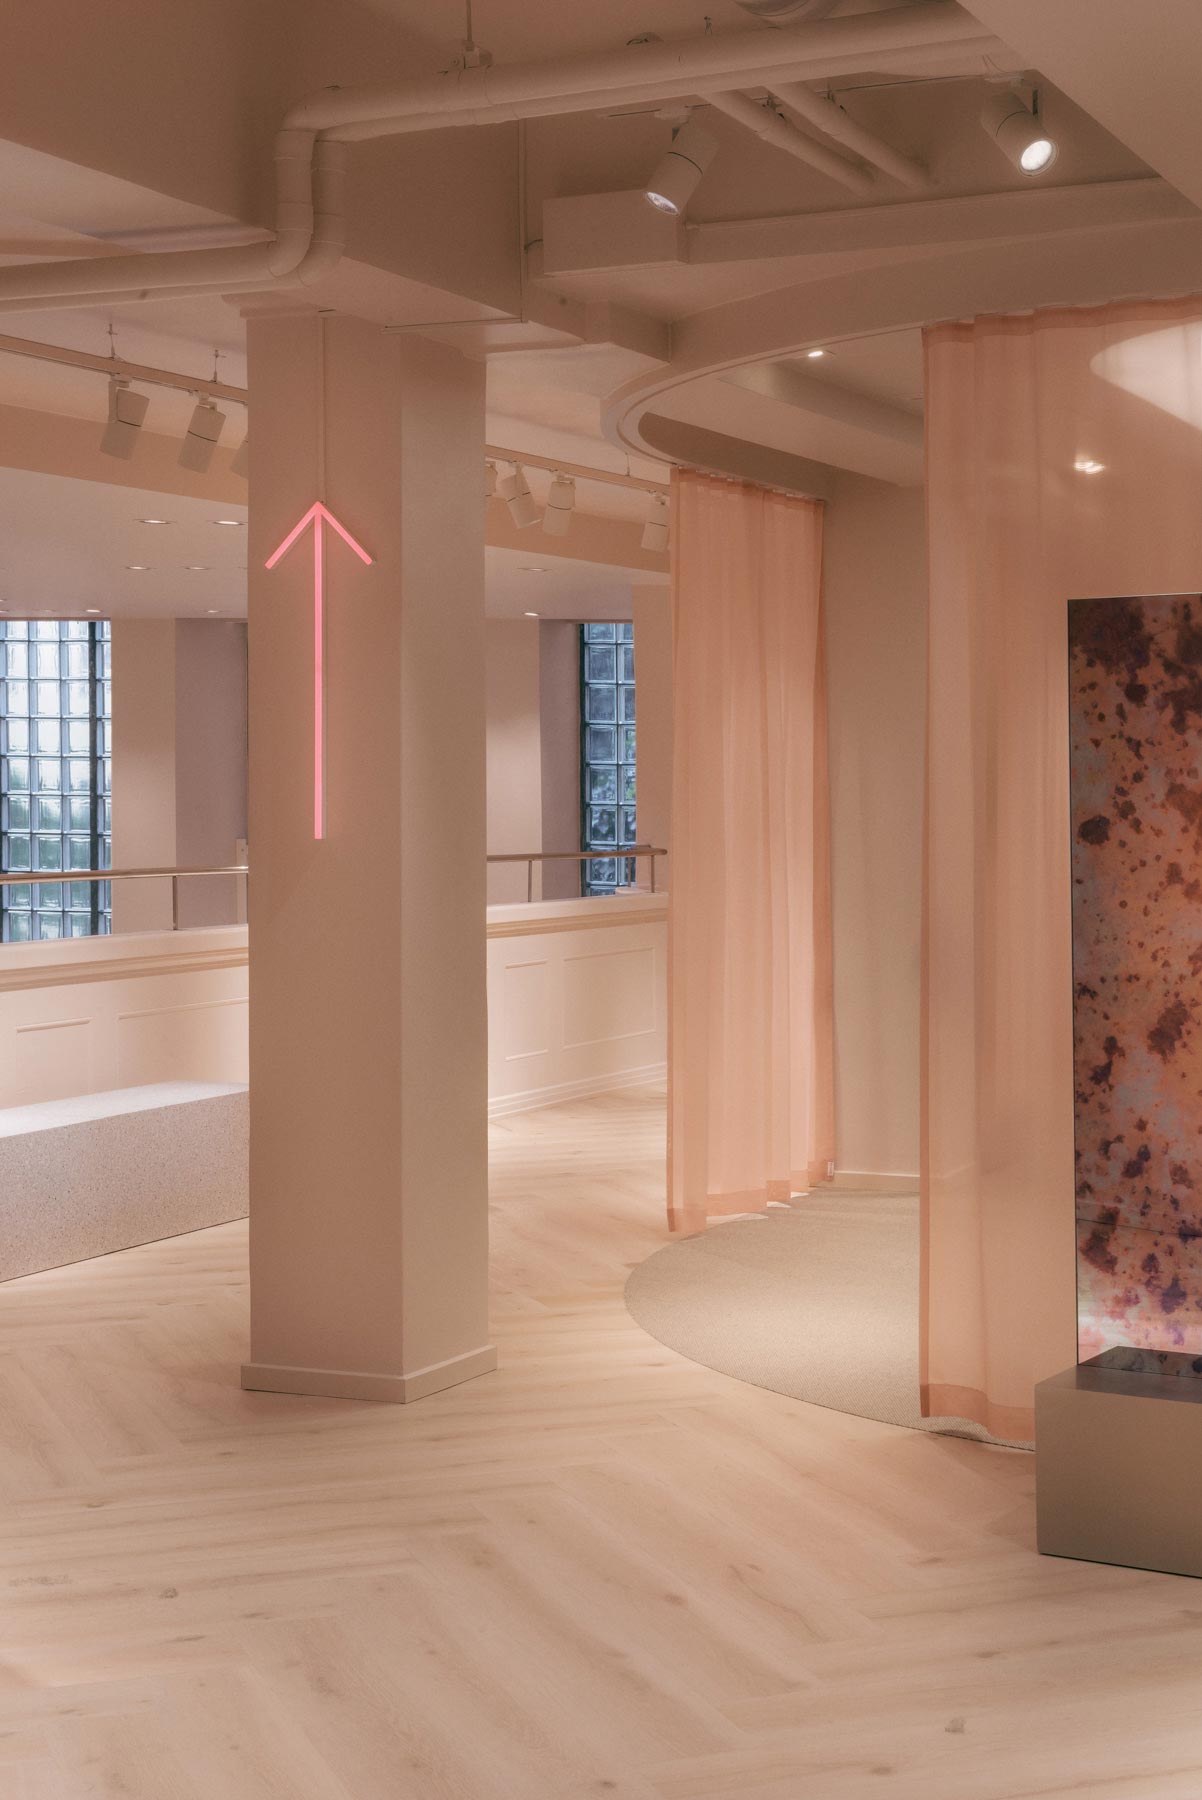 The Gina Tricot Concept Store Showcase Materiality & Tactility